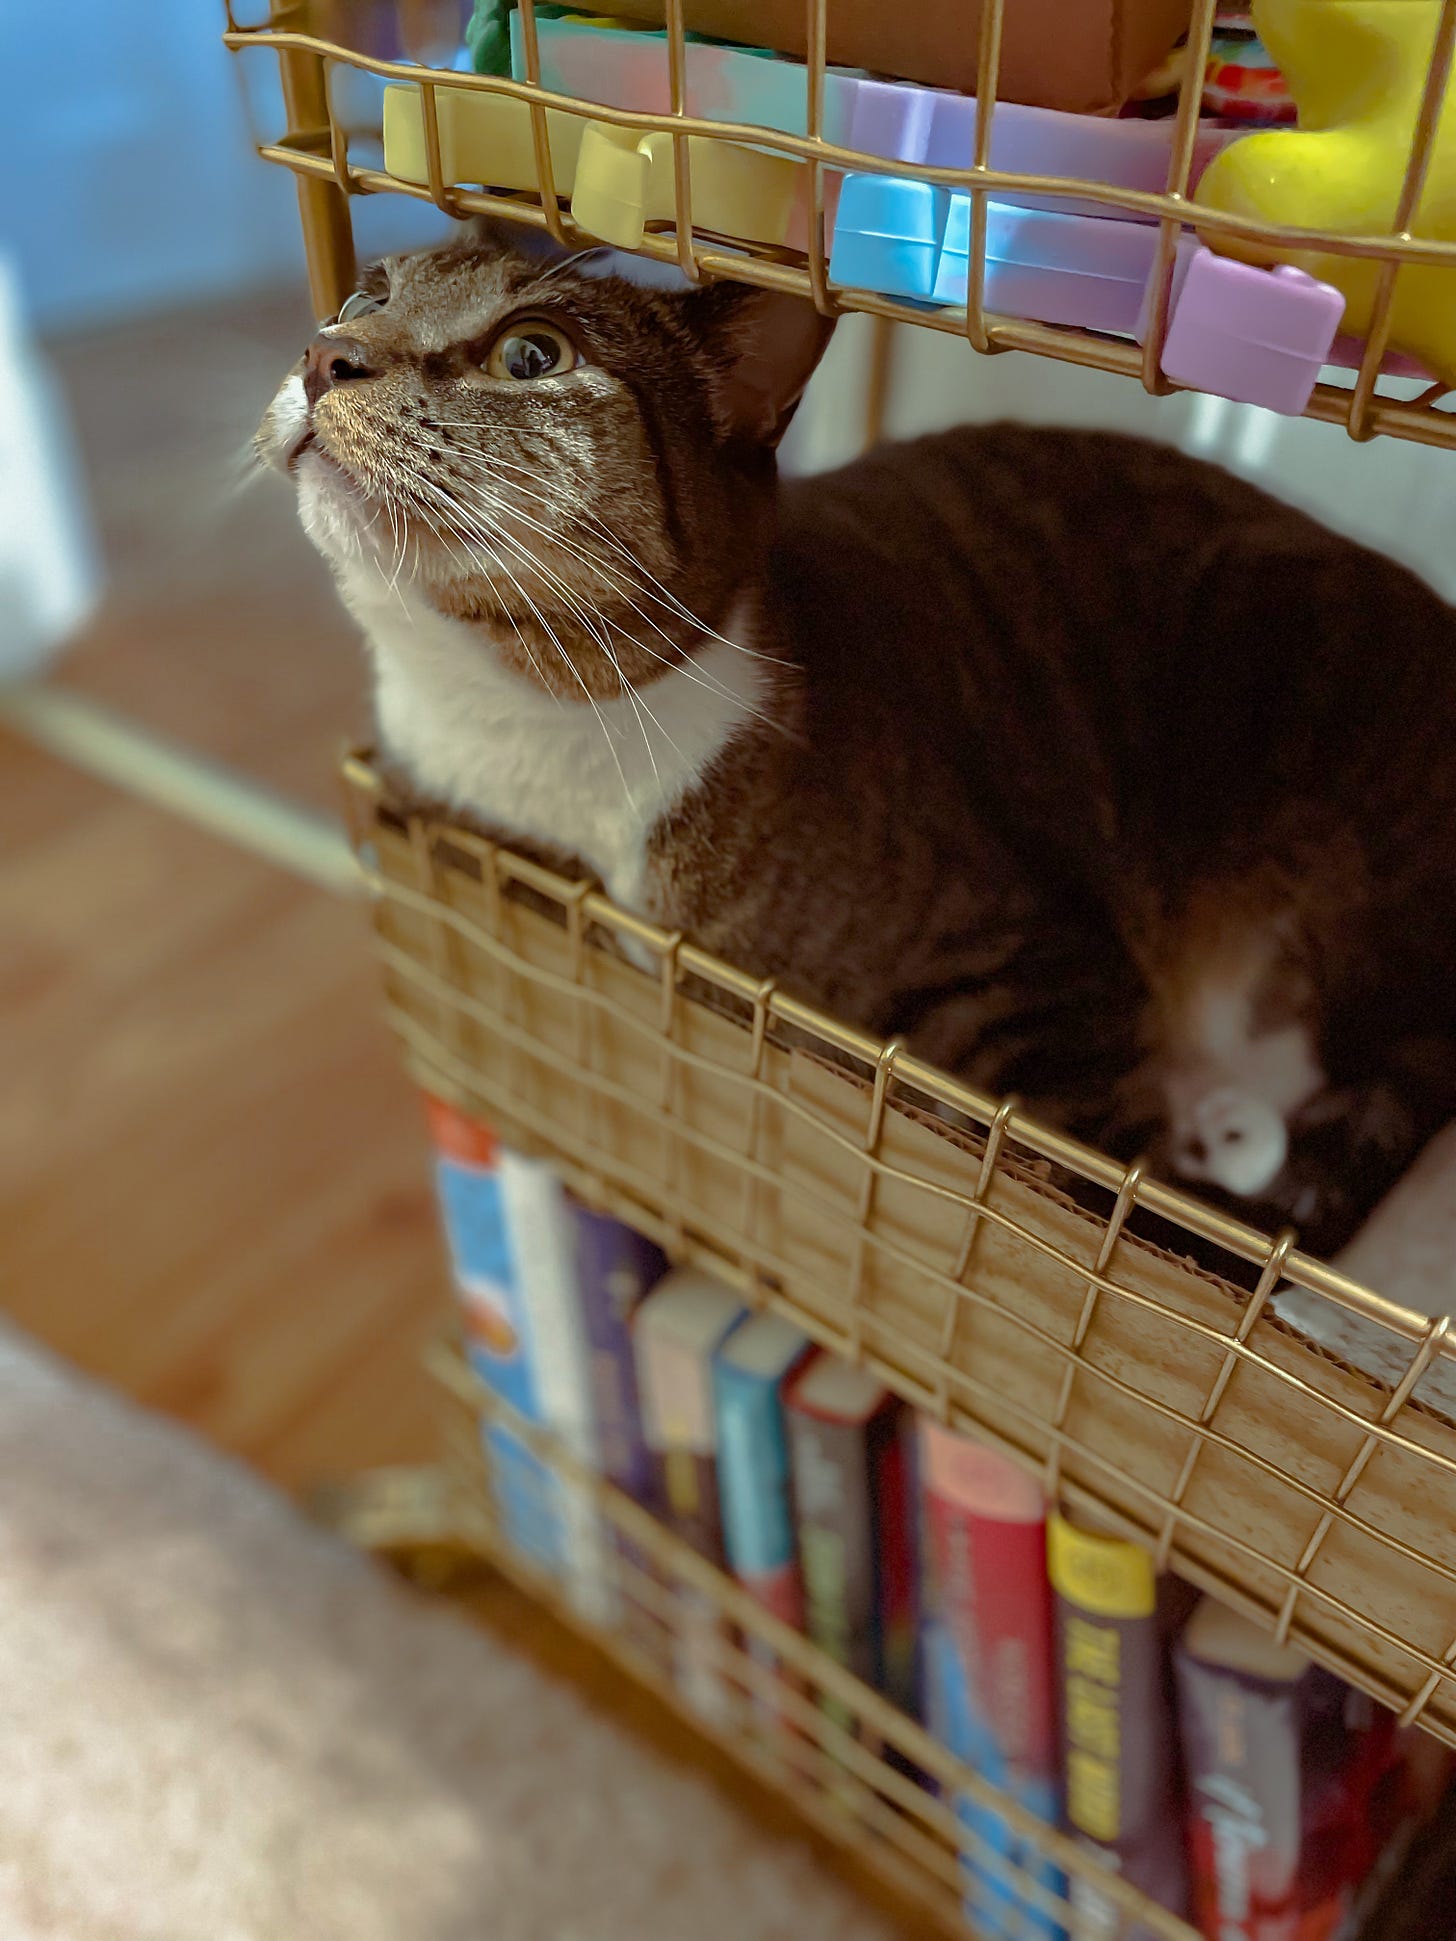 A grey, white and tan cat sits in the middle shelf of a metal book cart, looking up.